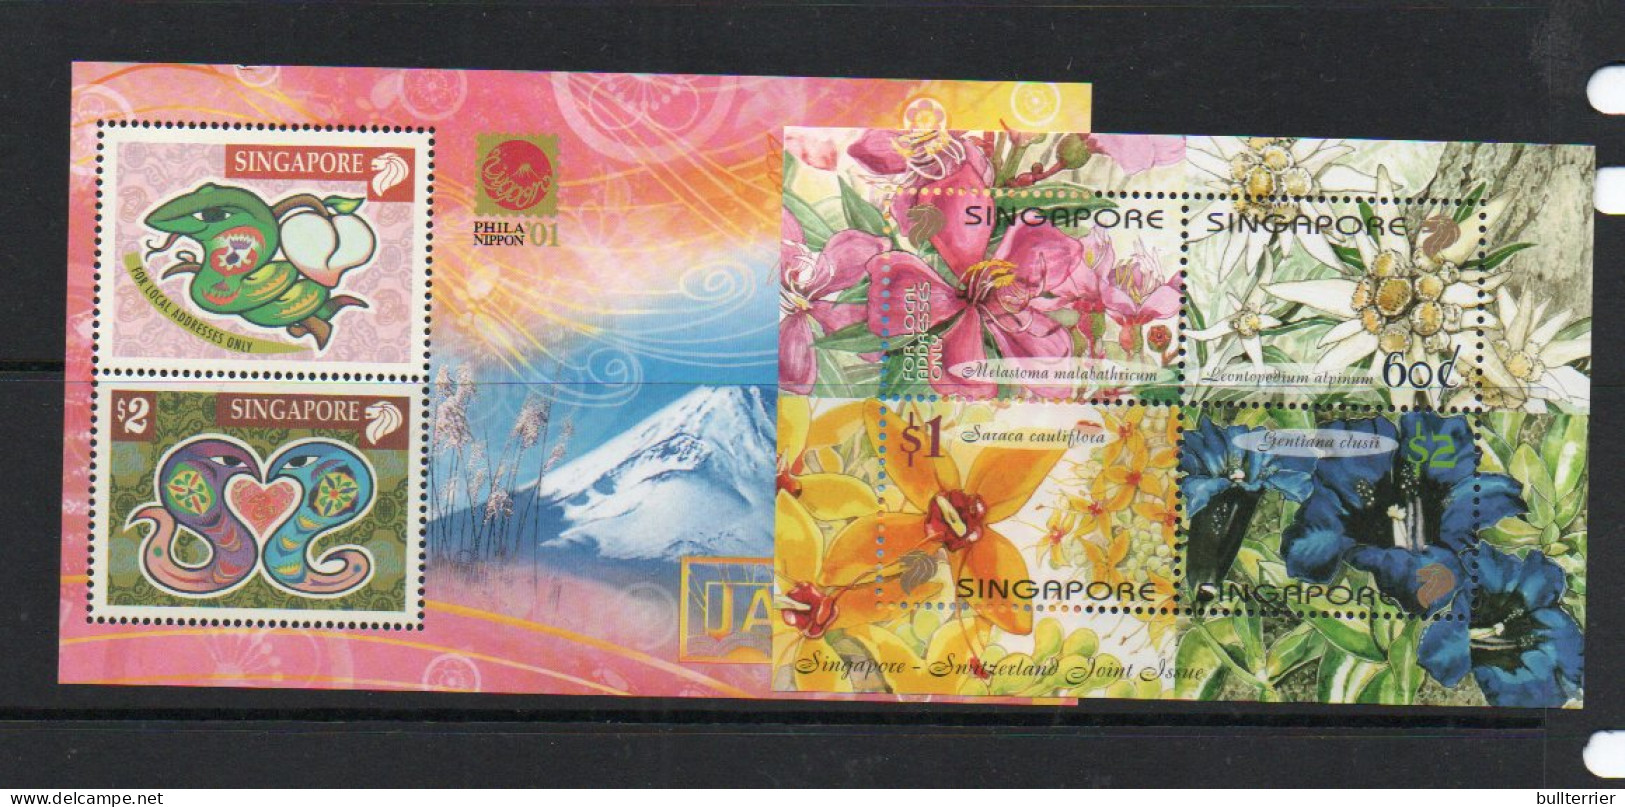 SINGAPORE - 2001 PHILANIPPON AND JOINT ISSUE SWITZERLAND S/SHEETS  MINT NEVER HINGED - Singapour (1959-...)